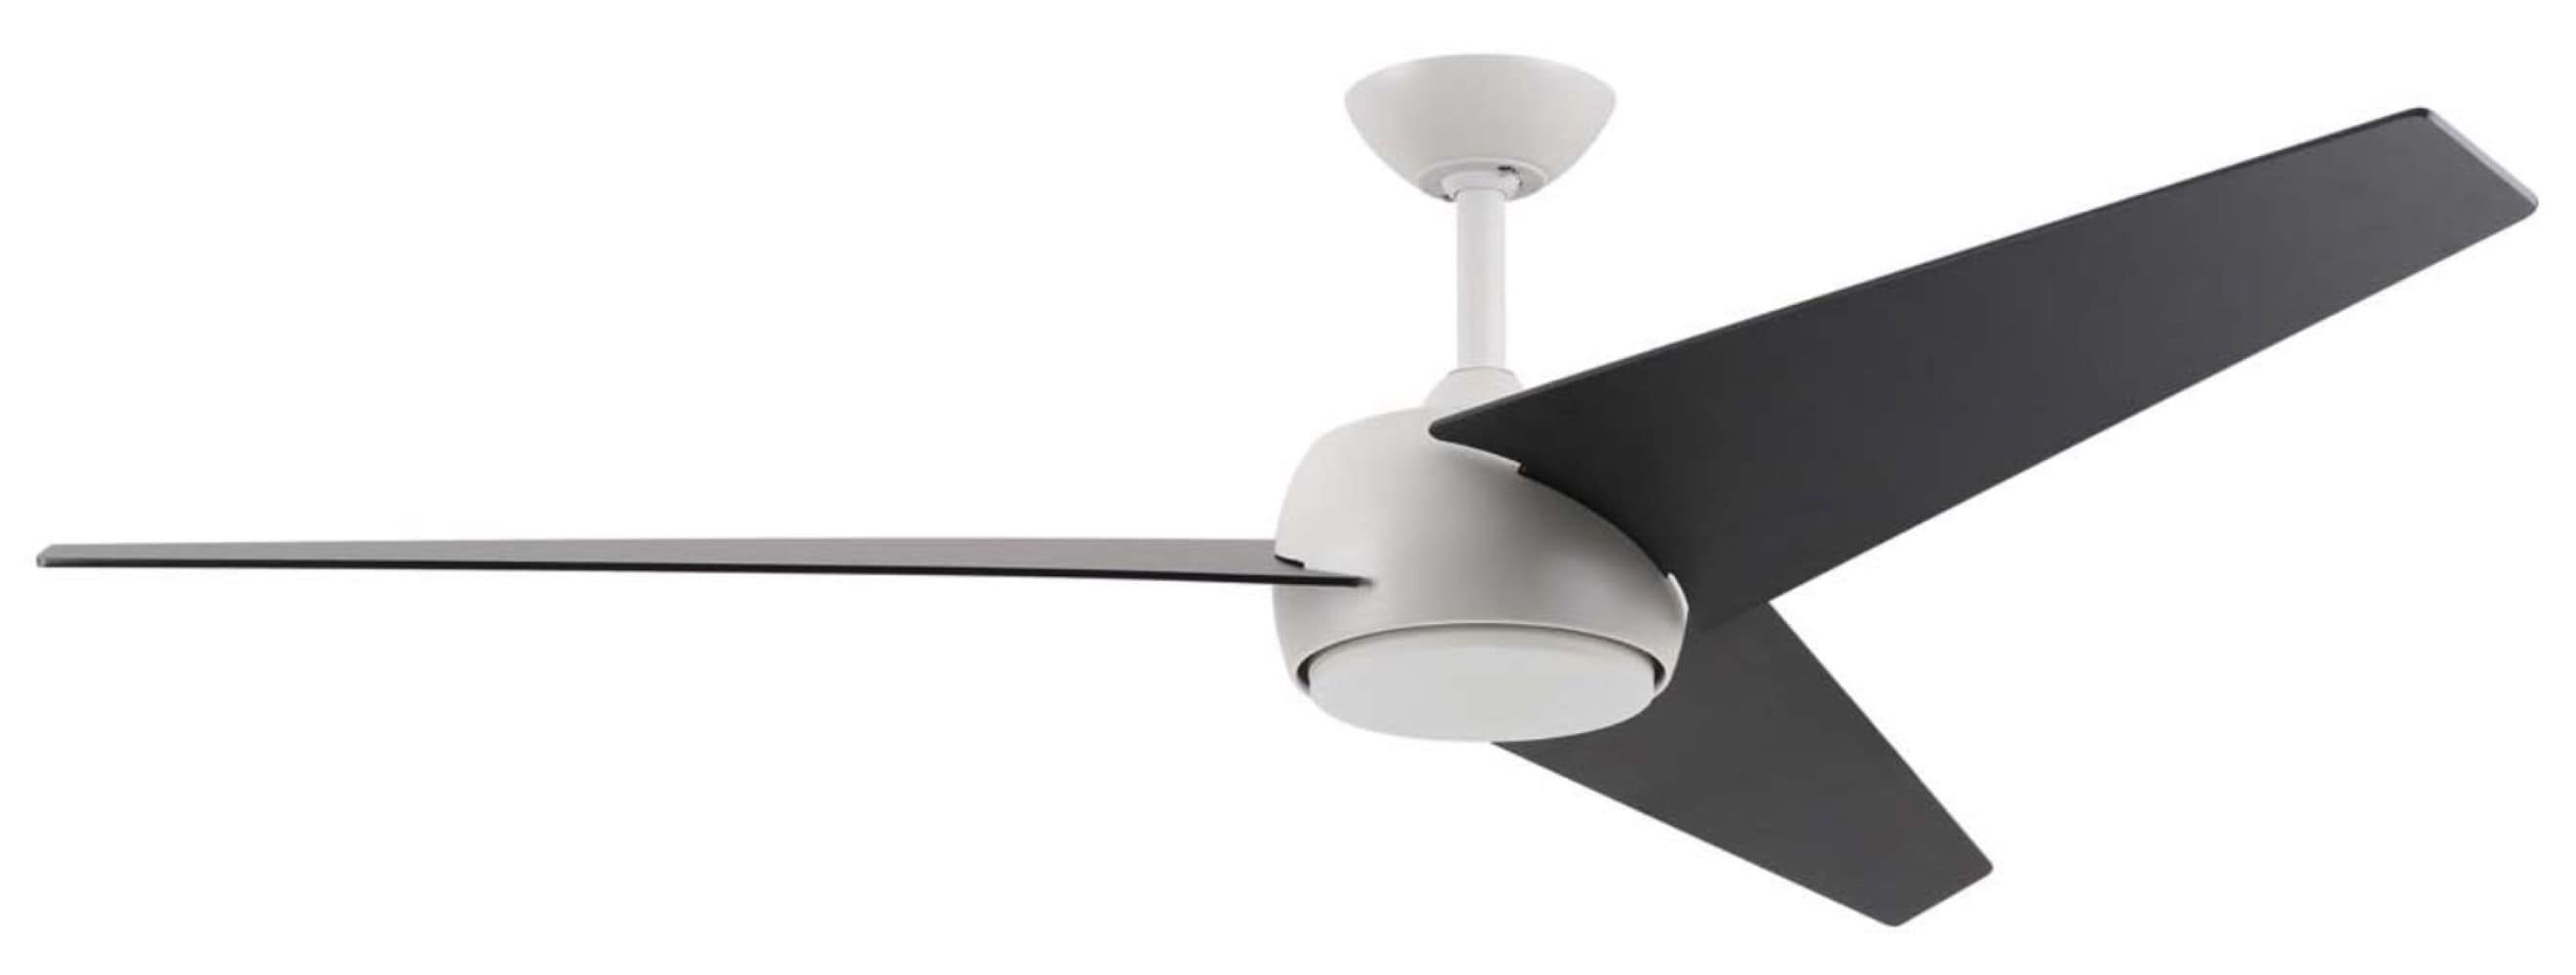 Dovenshire 60-in White LED Indoor Propeller Ceiling Fan with Light Remote (3-Blade) | - Harbor Breeze CGR60WW3LR